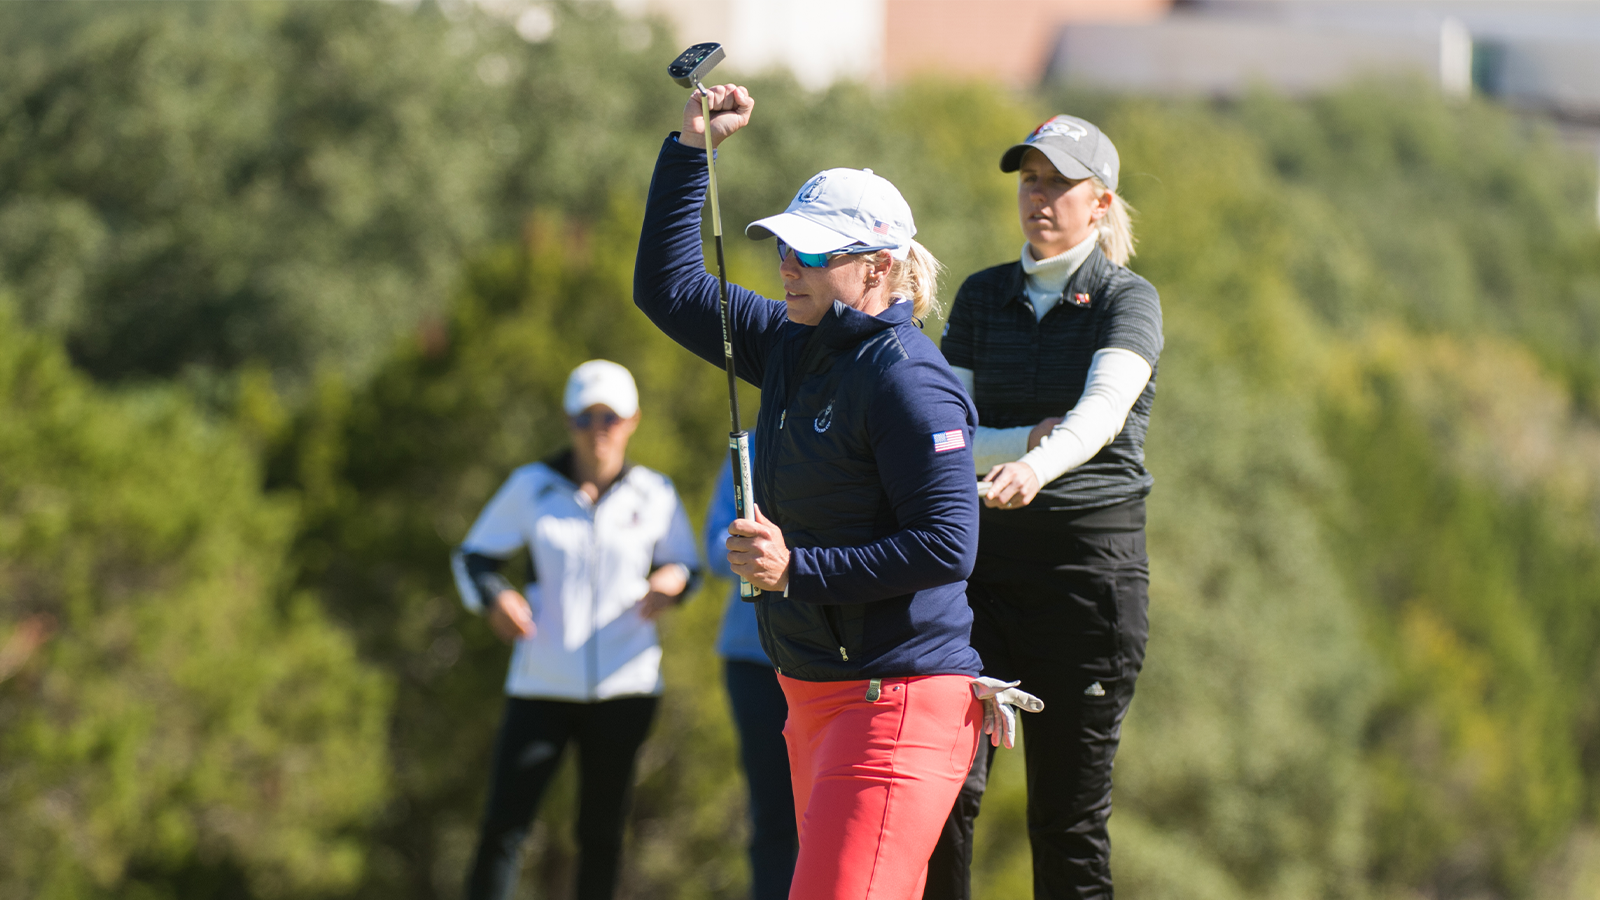 Alison Curdt of the United States reacts to her putt on the eighth hole during the final round for the 2019 Women's PGA Cup held at the Omni Barton Creek Resort & Spa on October 26, 2019 in Austin, Texas. (Photo by Hailey Garrett/PGA of America)